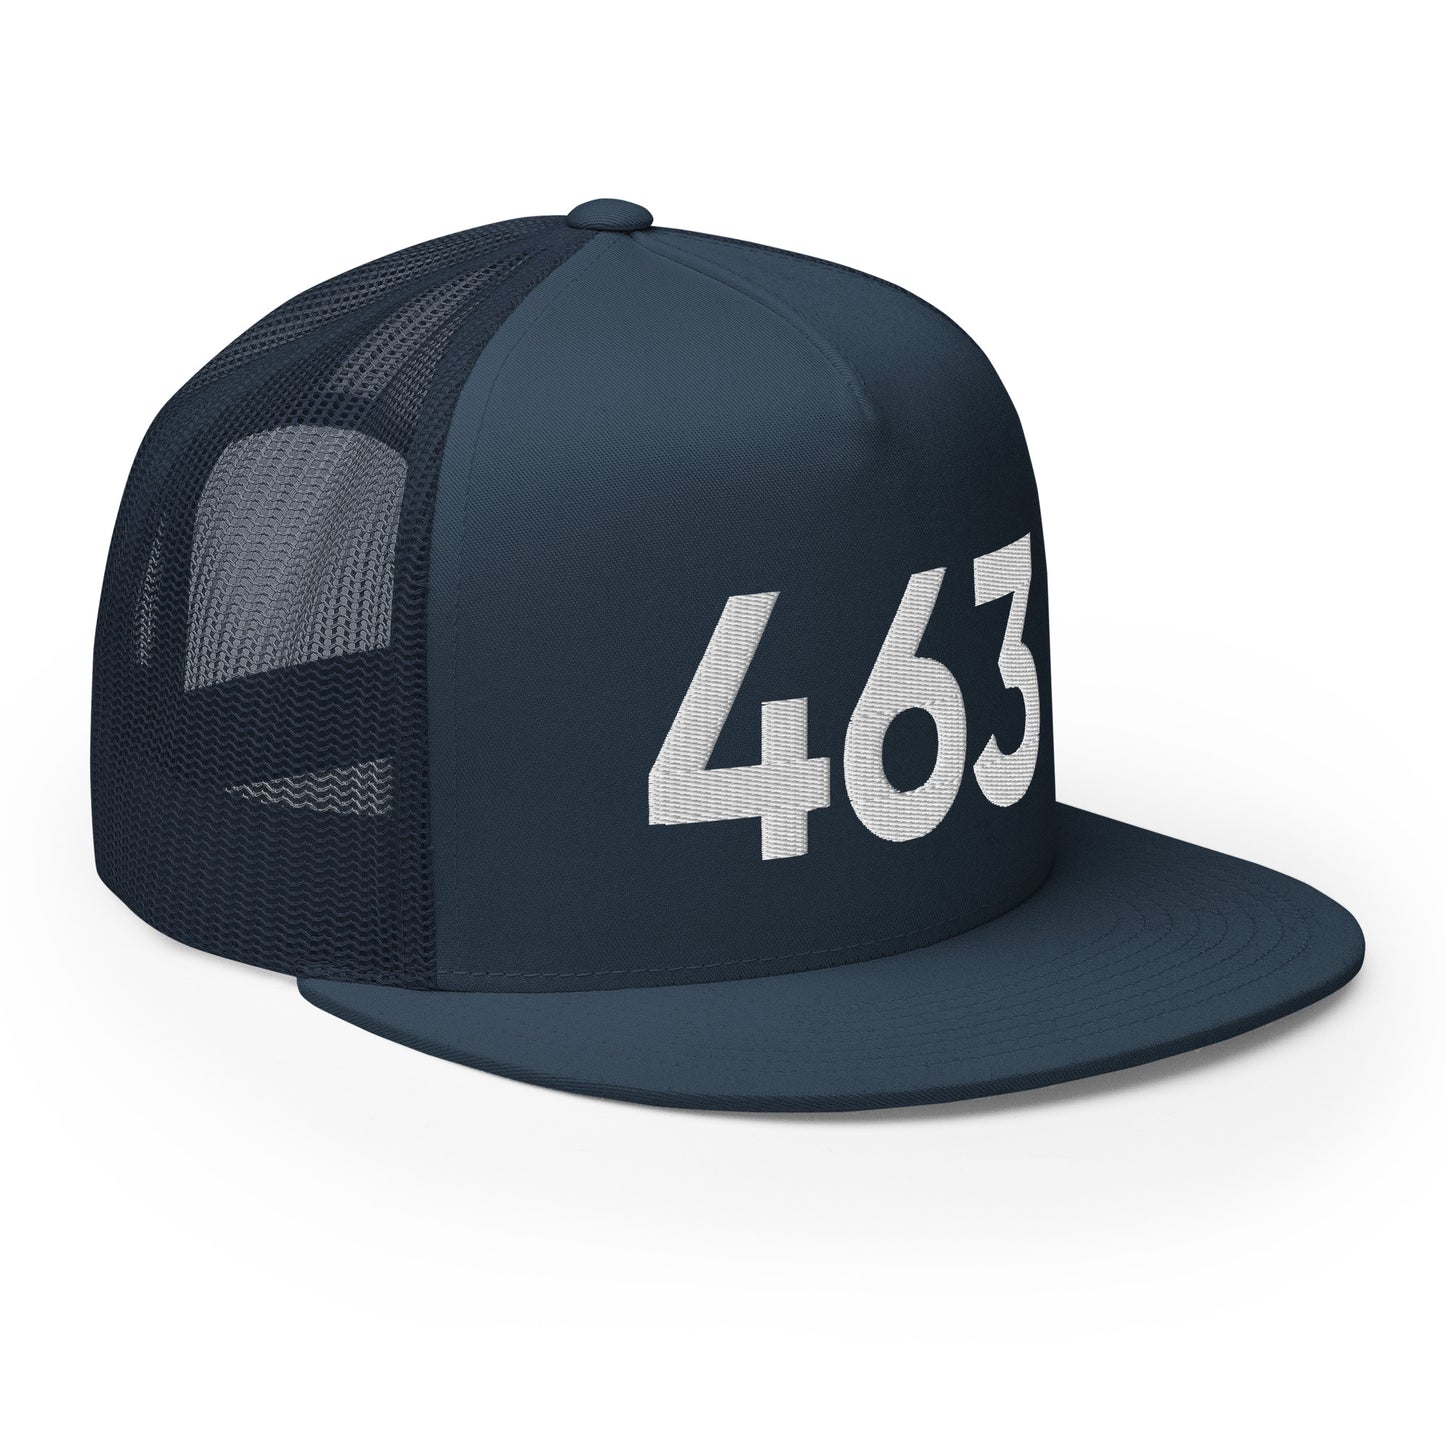 463 Indy Strong Trucker Hat